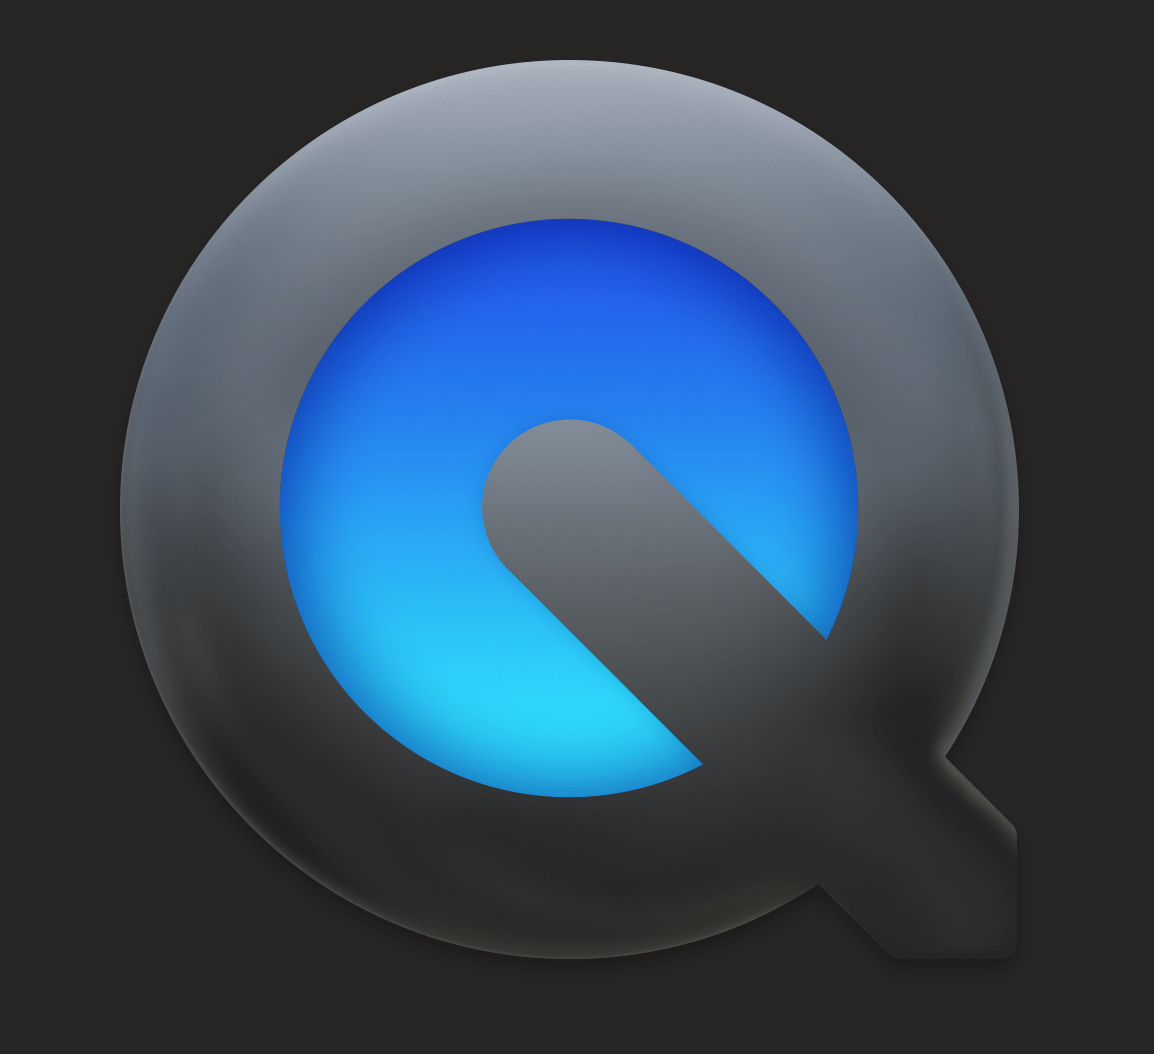 get image from quicktime player for mac